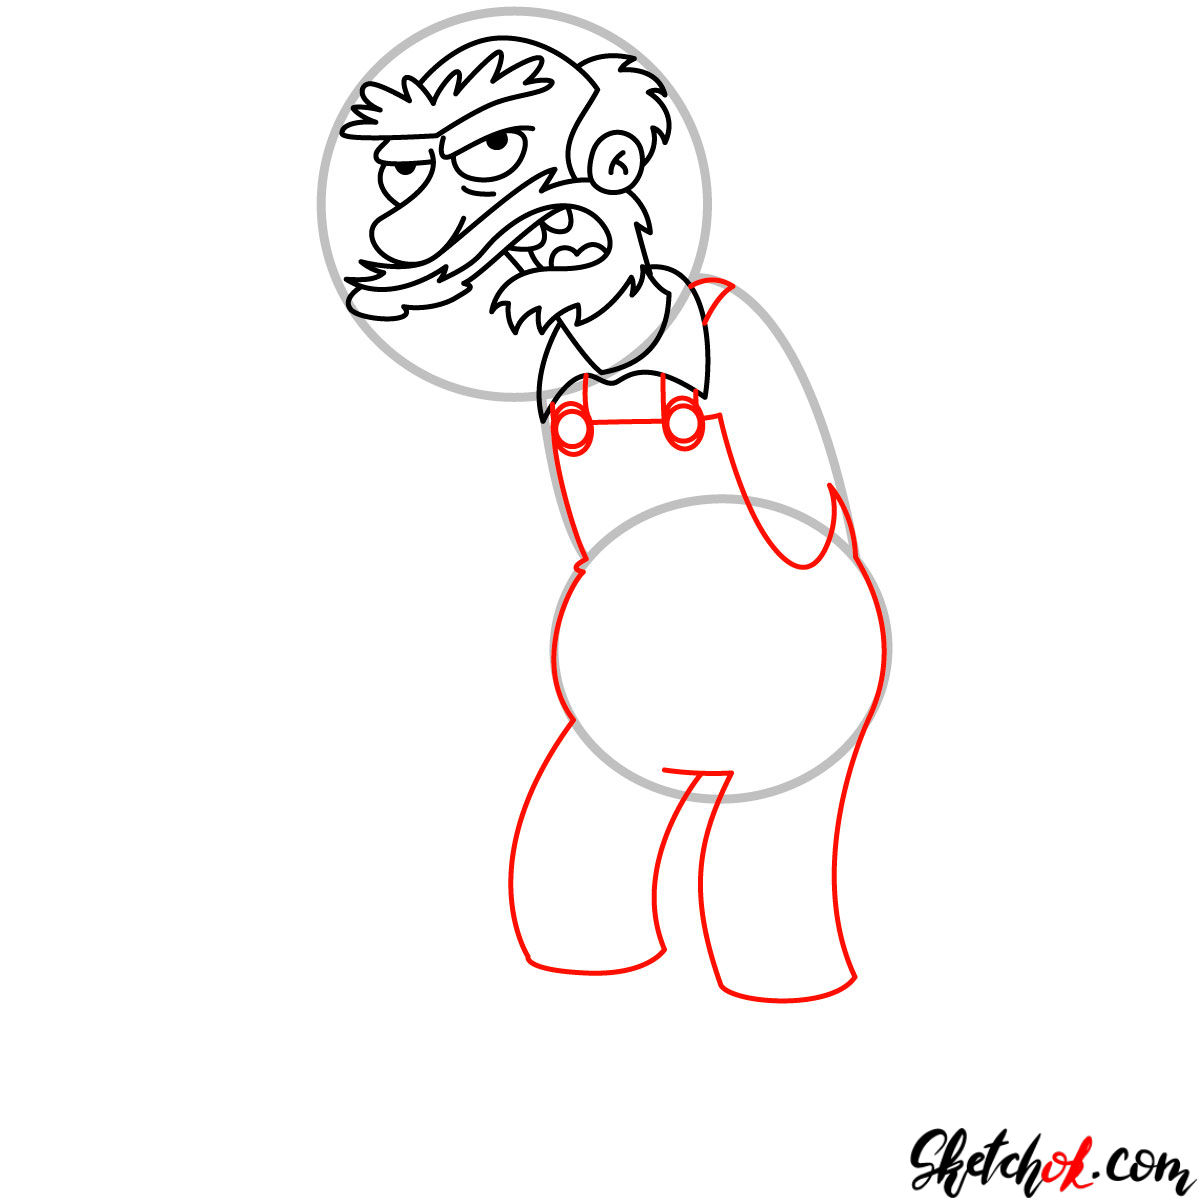 How to draw Groundskeeper Willie with a shovel - step 07